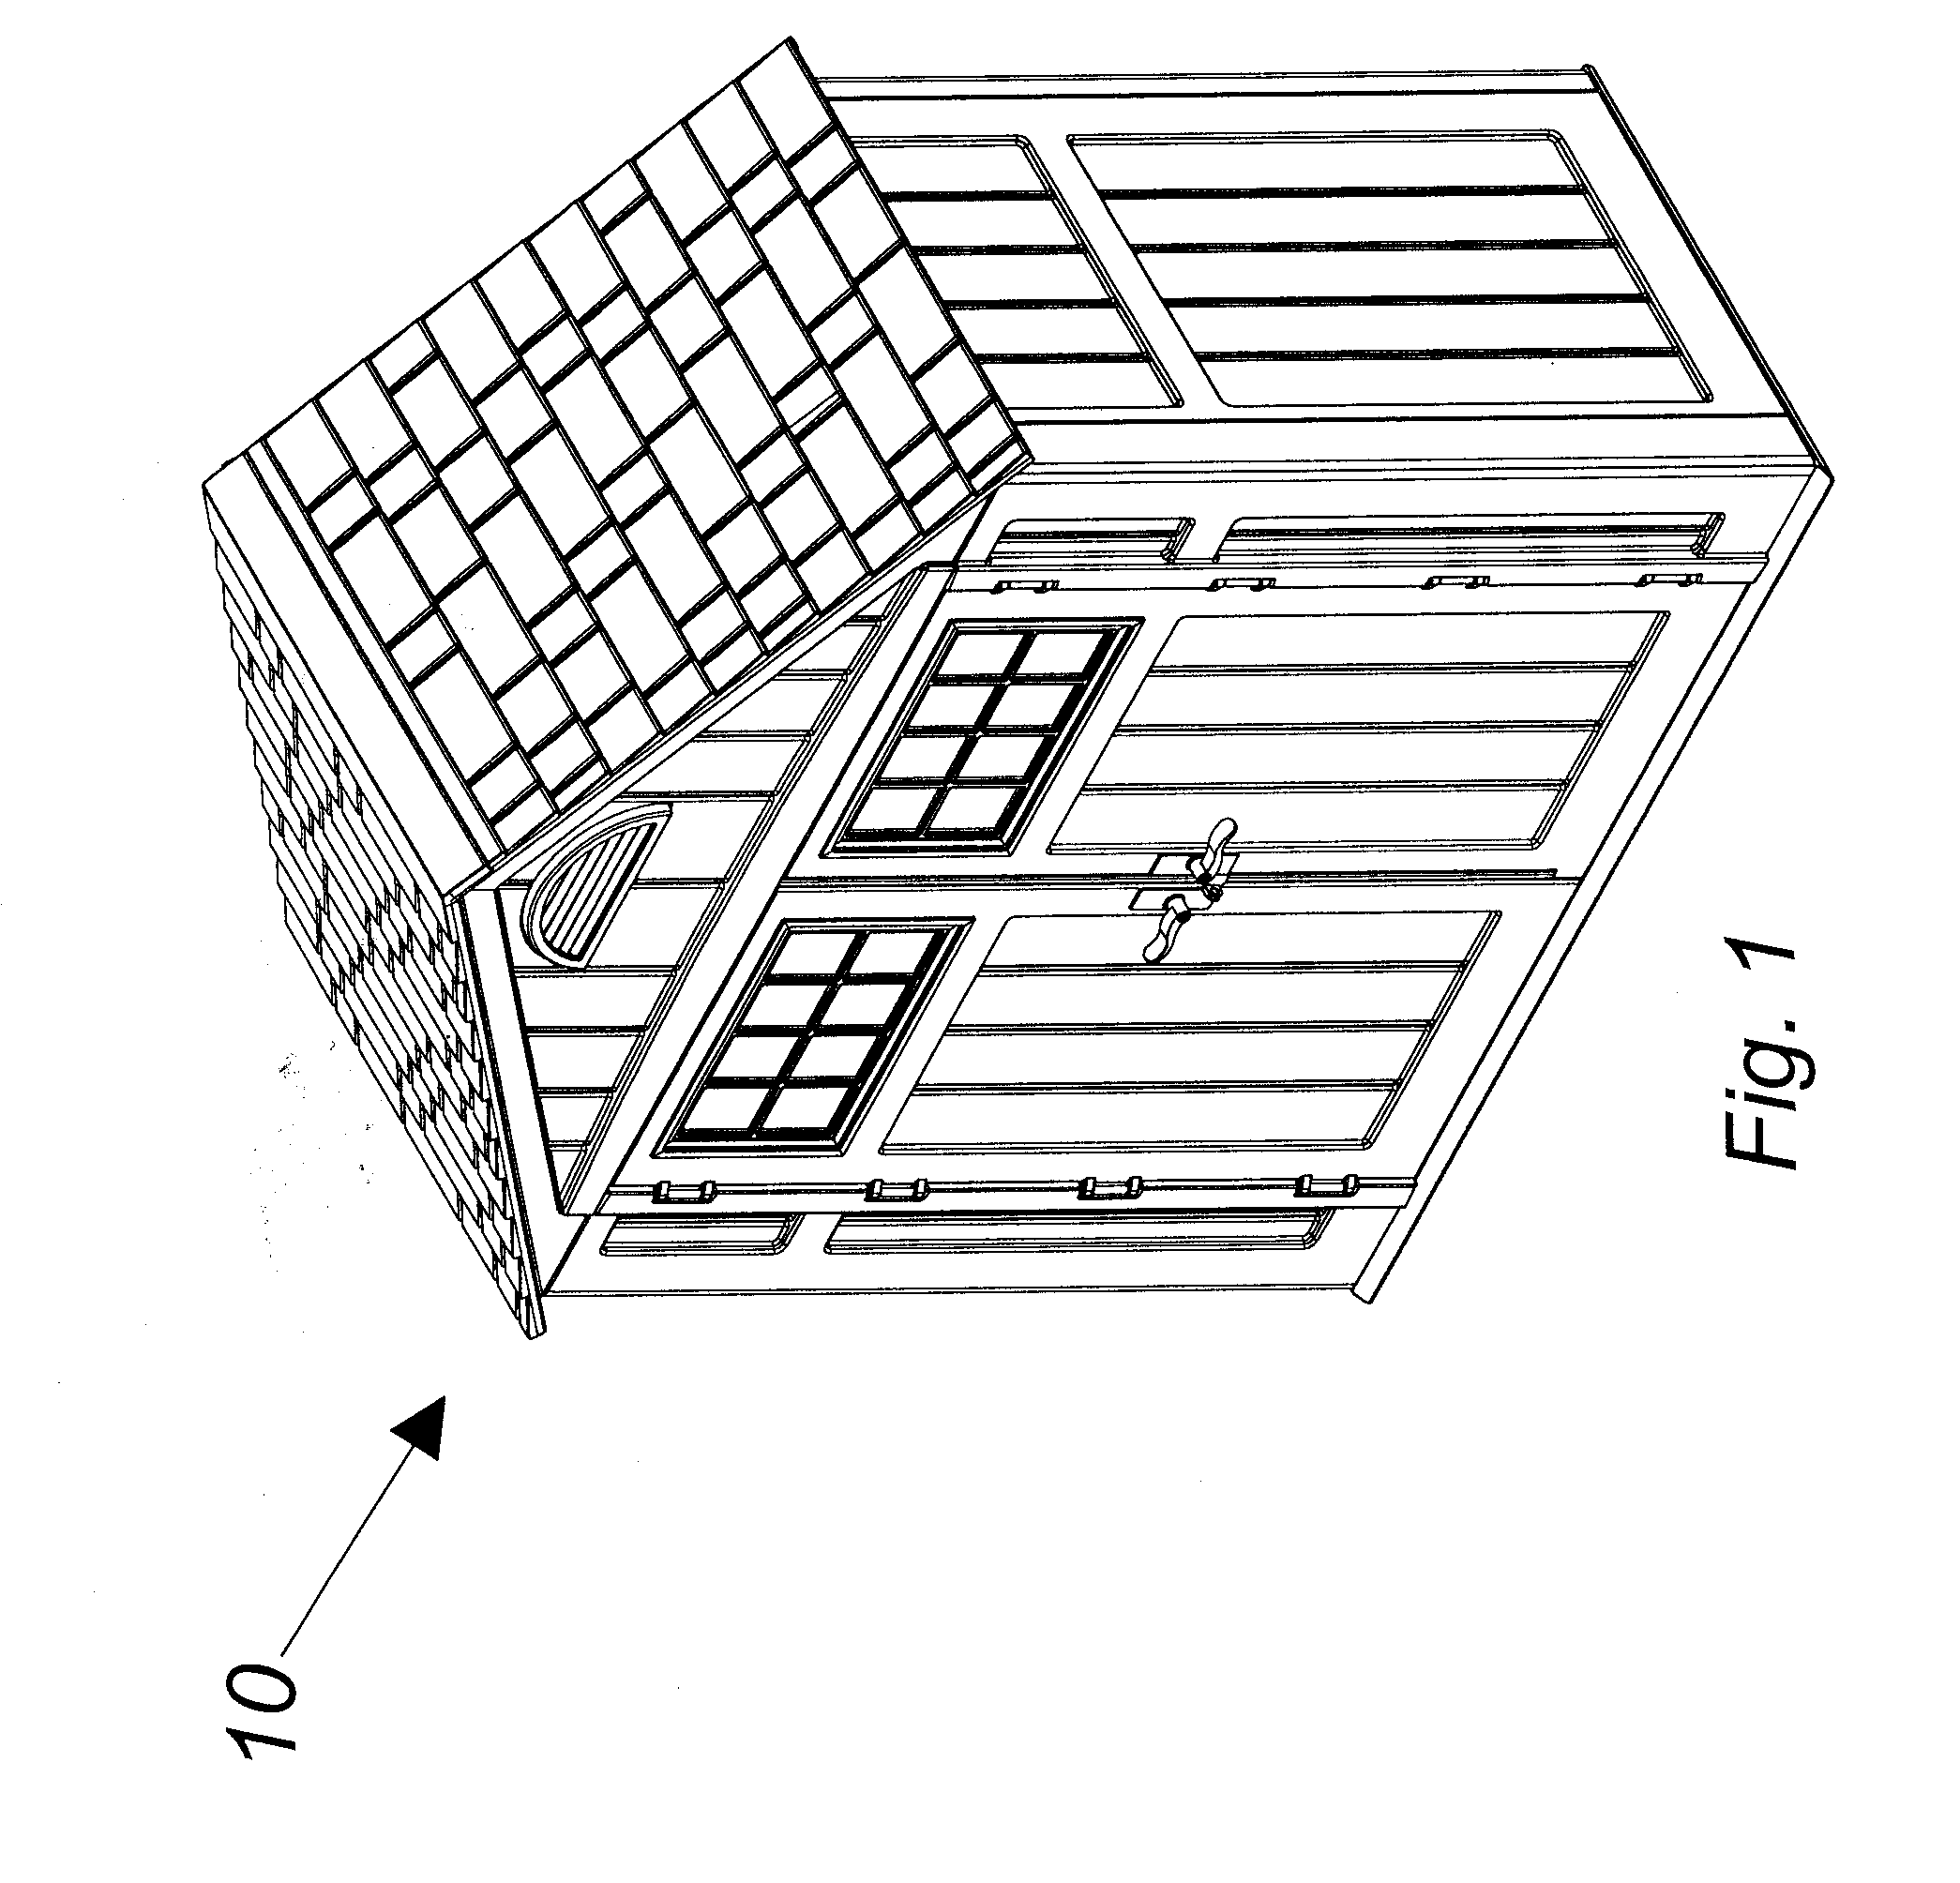 Modular blow molded shed with connectors